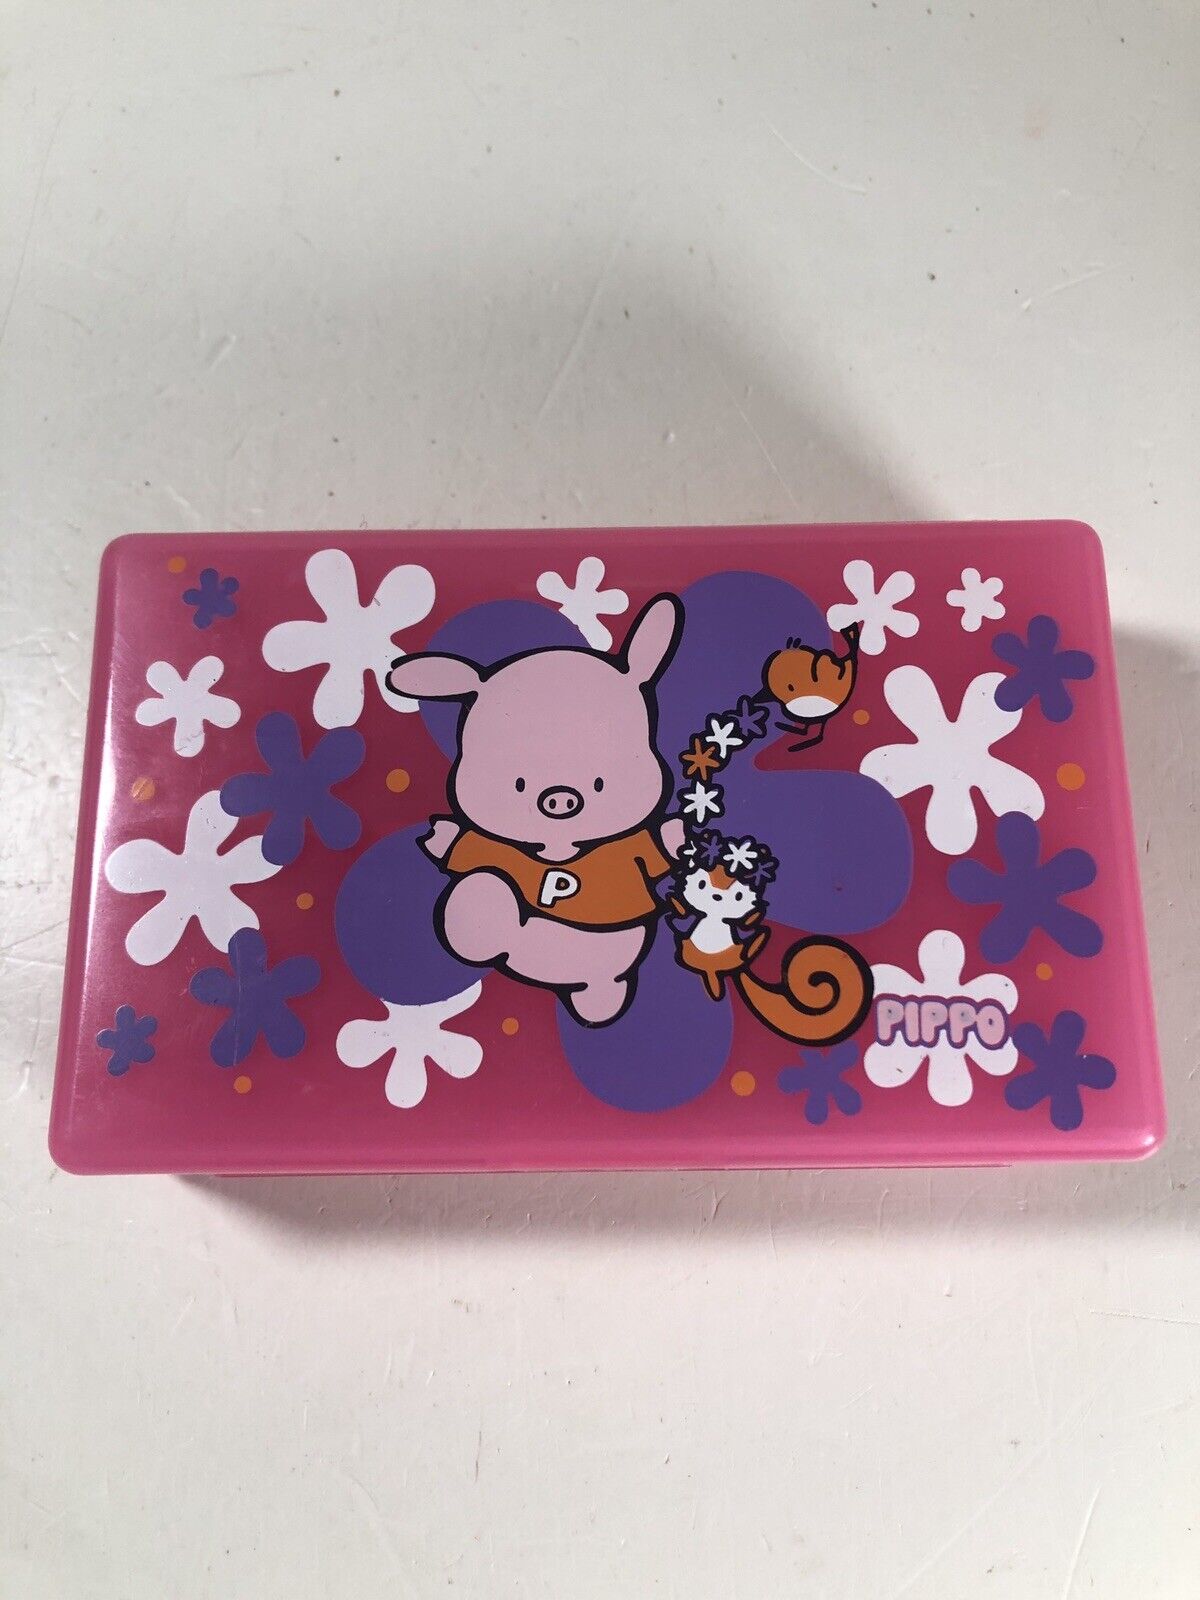 Vintage Sanrio Pippo the Pig & Yumeha Squirrel Double Sided Case Box 1996 Cute